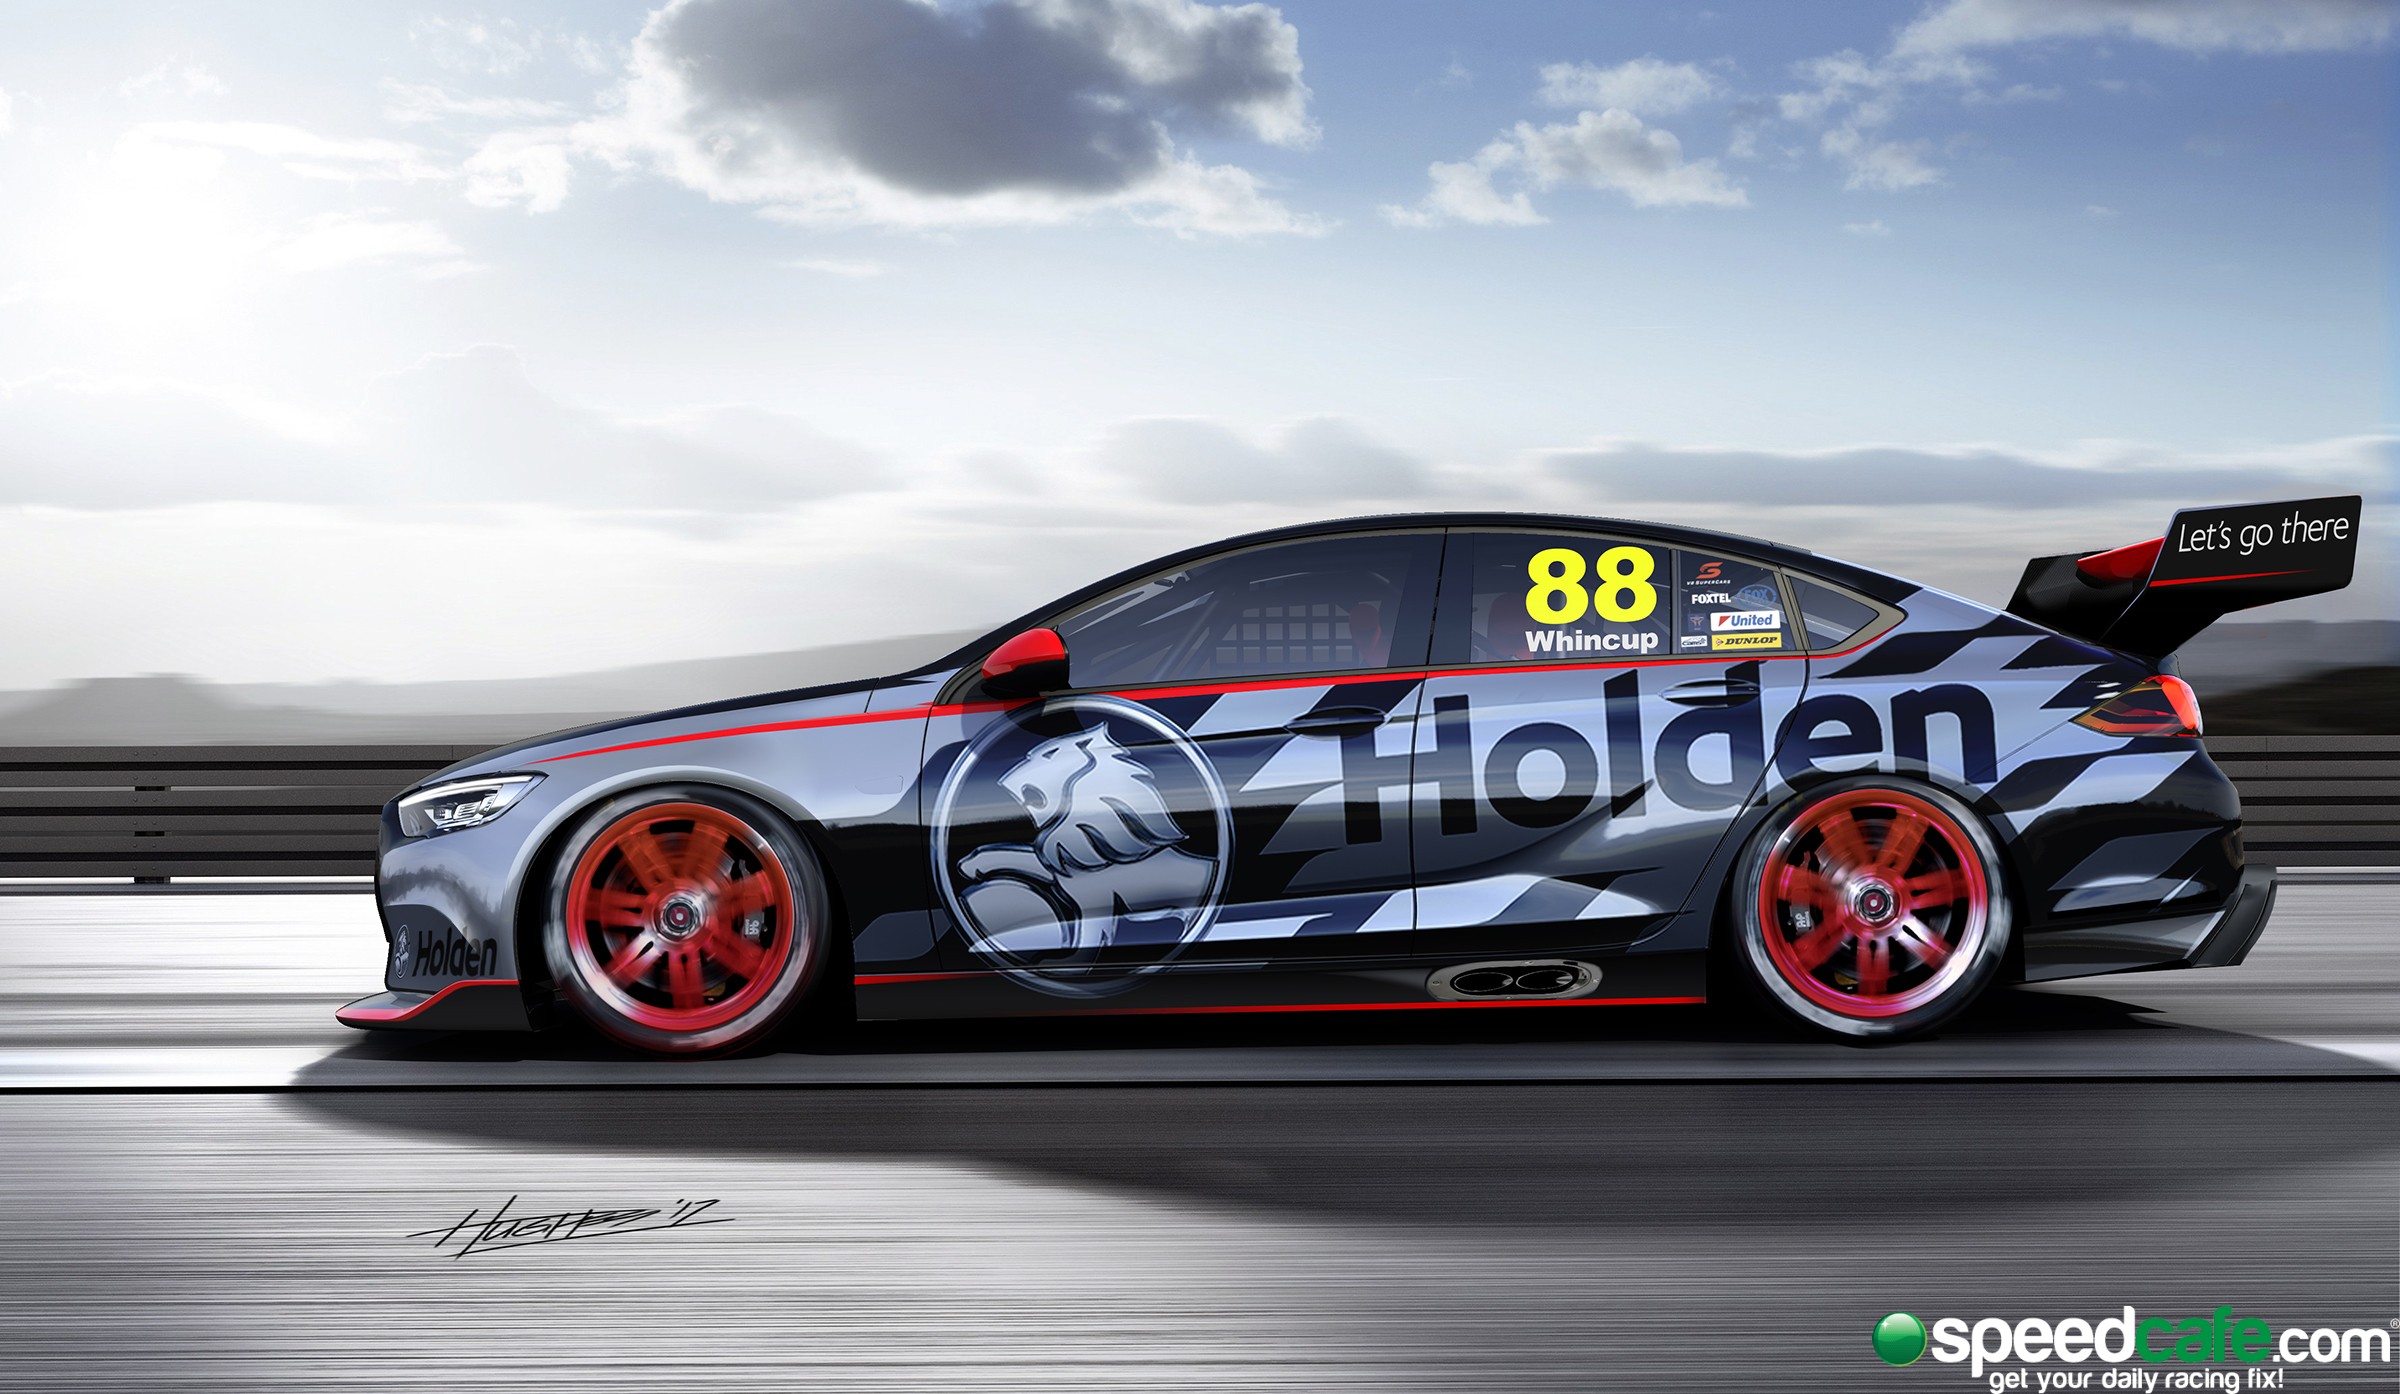 Holden's official render of the new Commodore Supercar